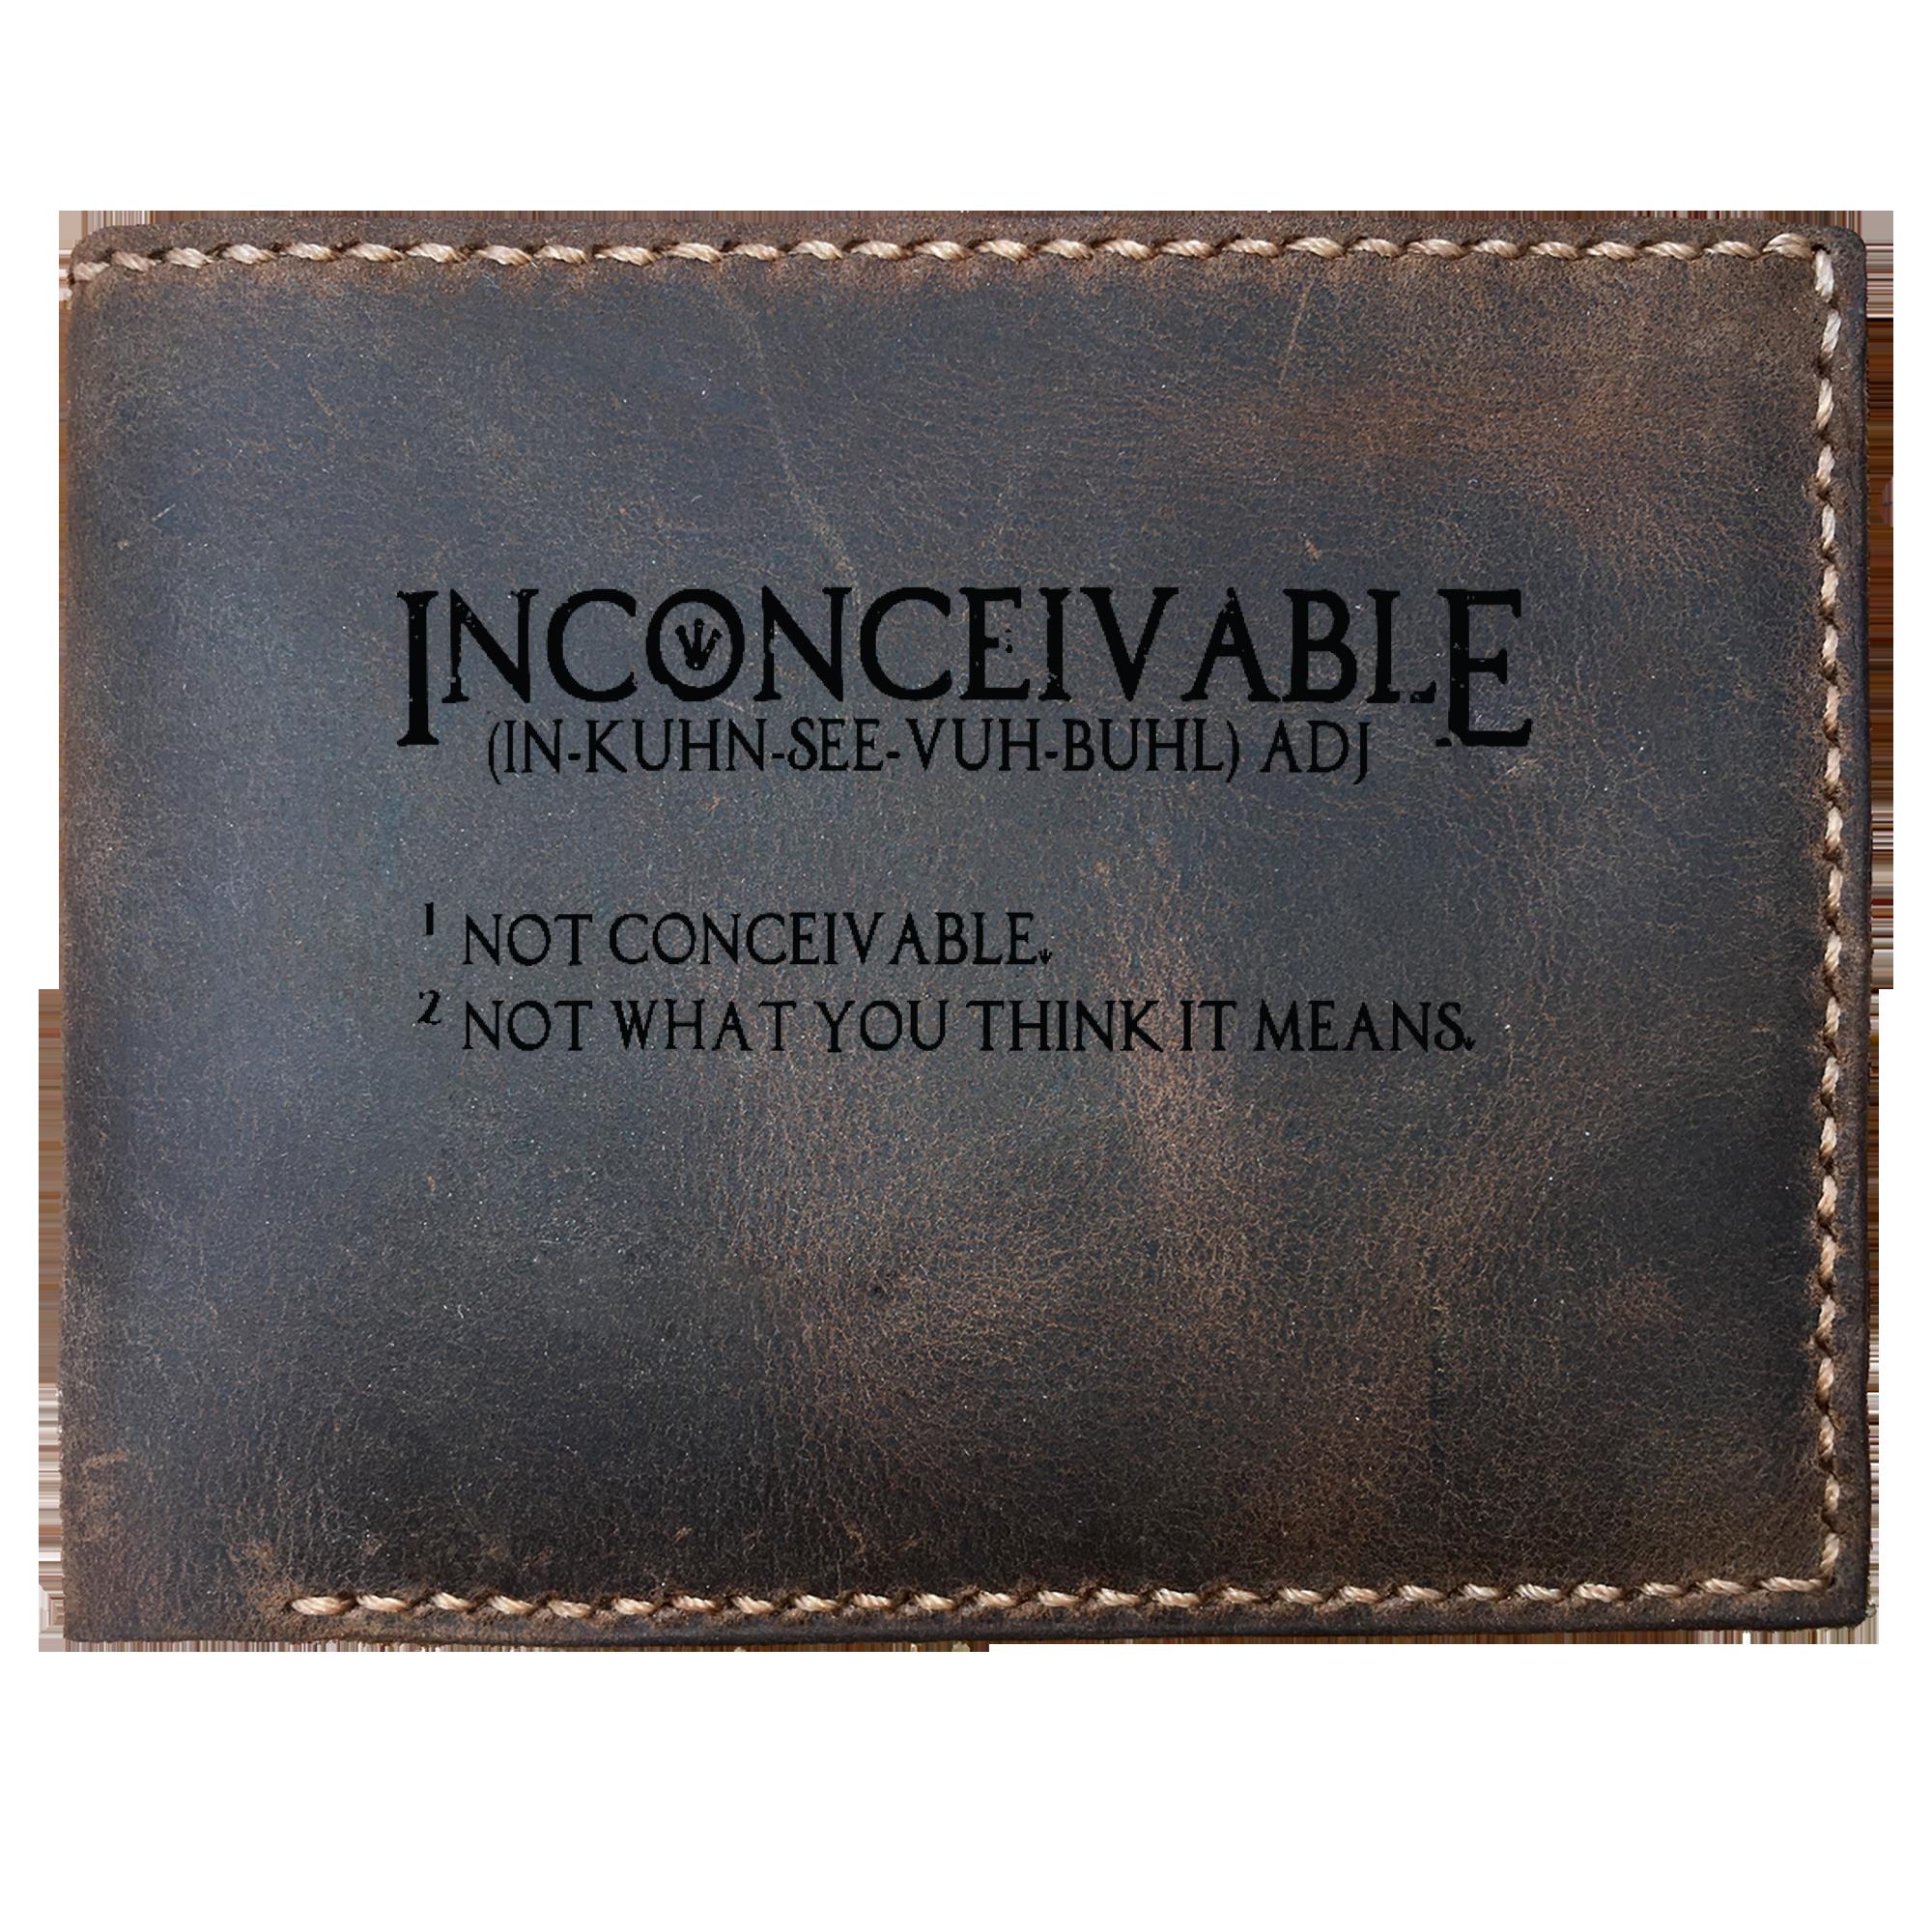 Skitongifts Funny Custom Laser Engraved Bifold Leather Wallet For Men, Princess Bride Inconceivable